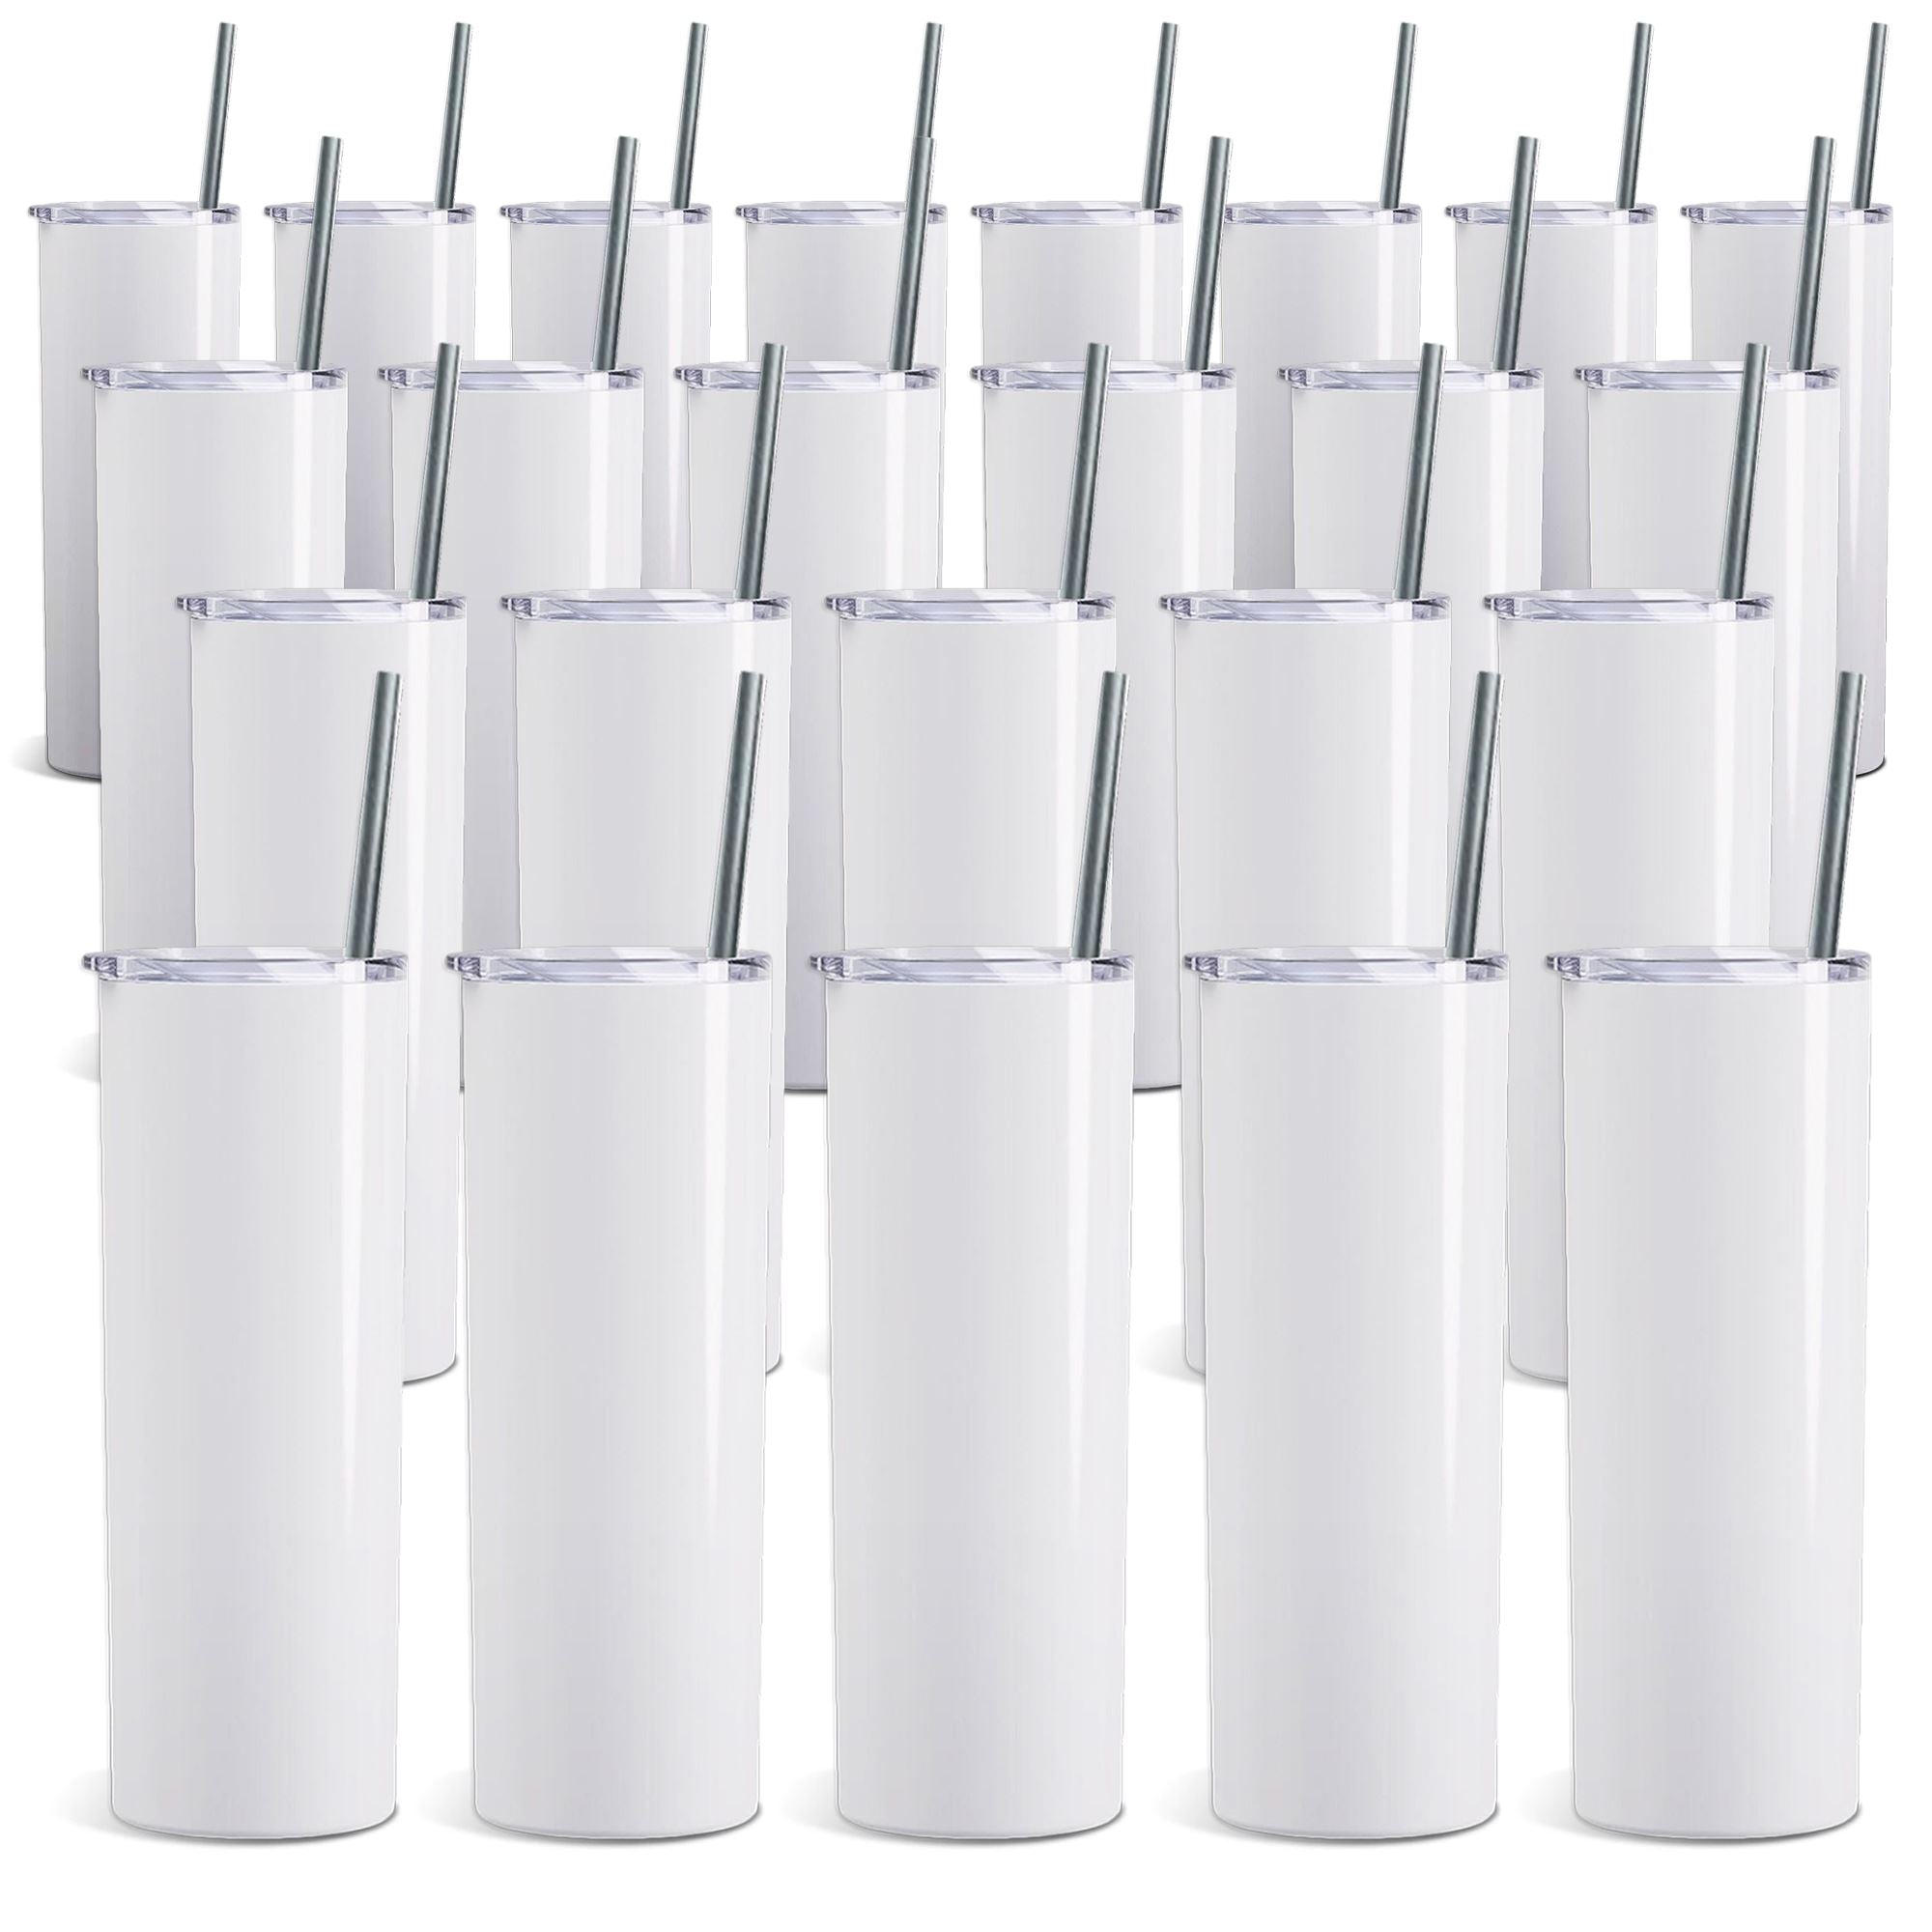 24 Pack: 12oz. Stainless Steel Sublimation Tumbler by Make Market, Size: One size, White